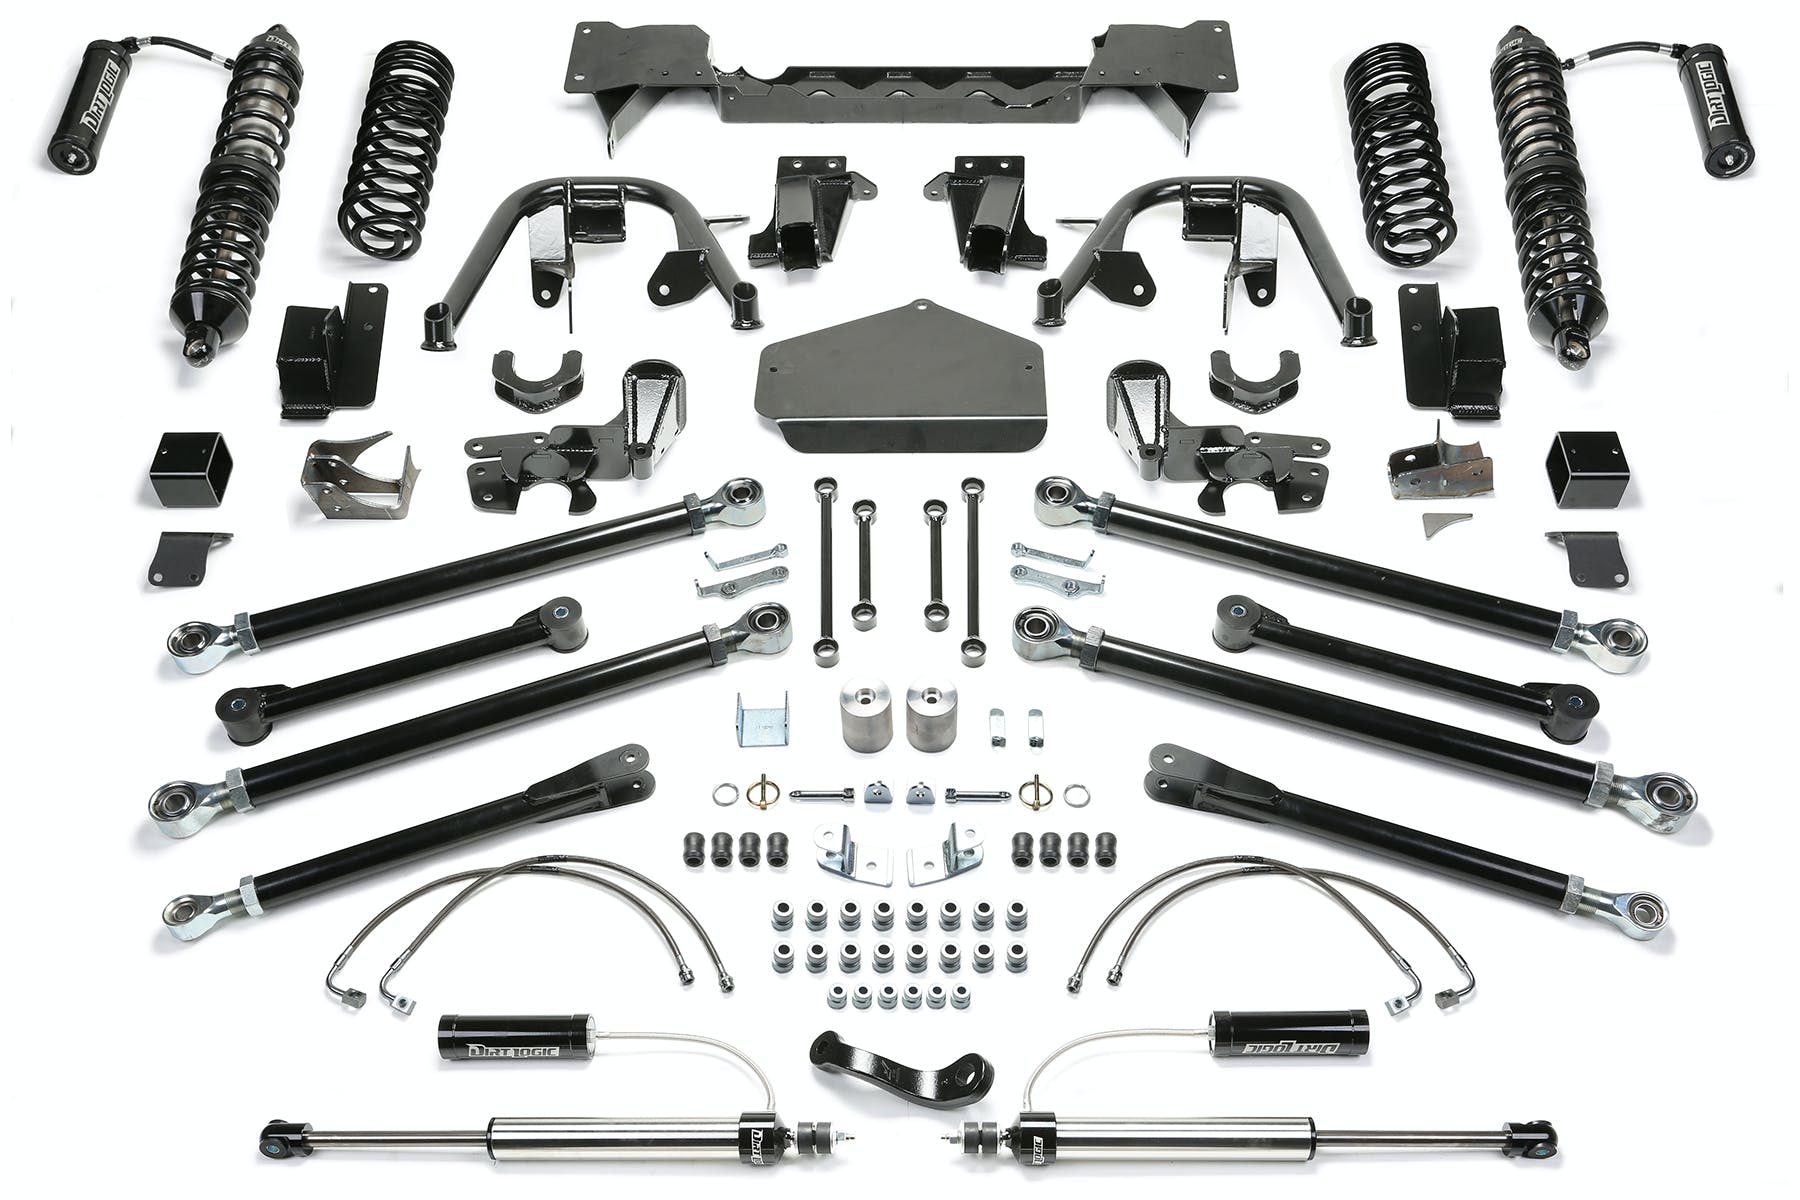 Fabtech K4066DL Crawler Coilover Lift System